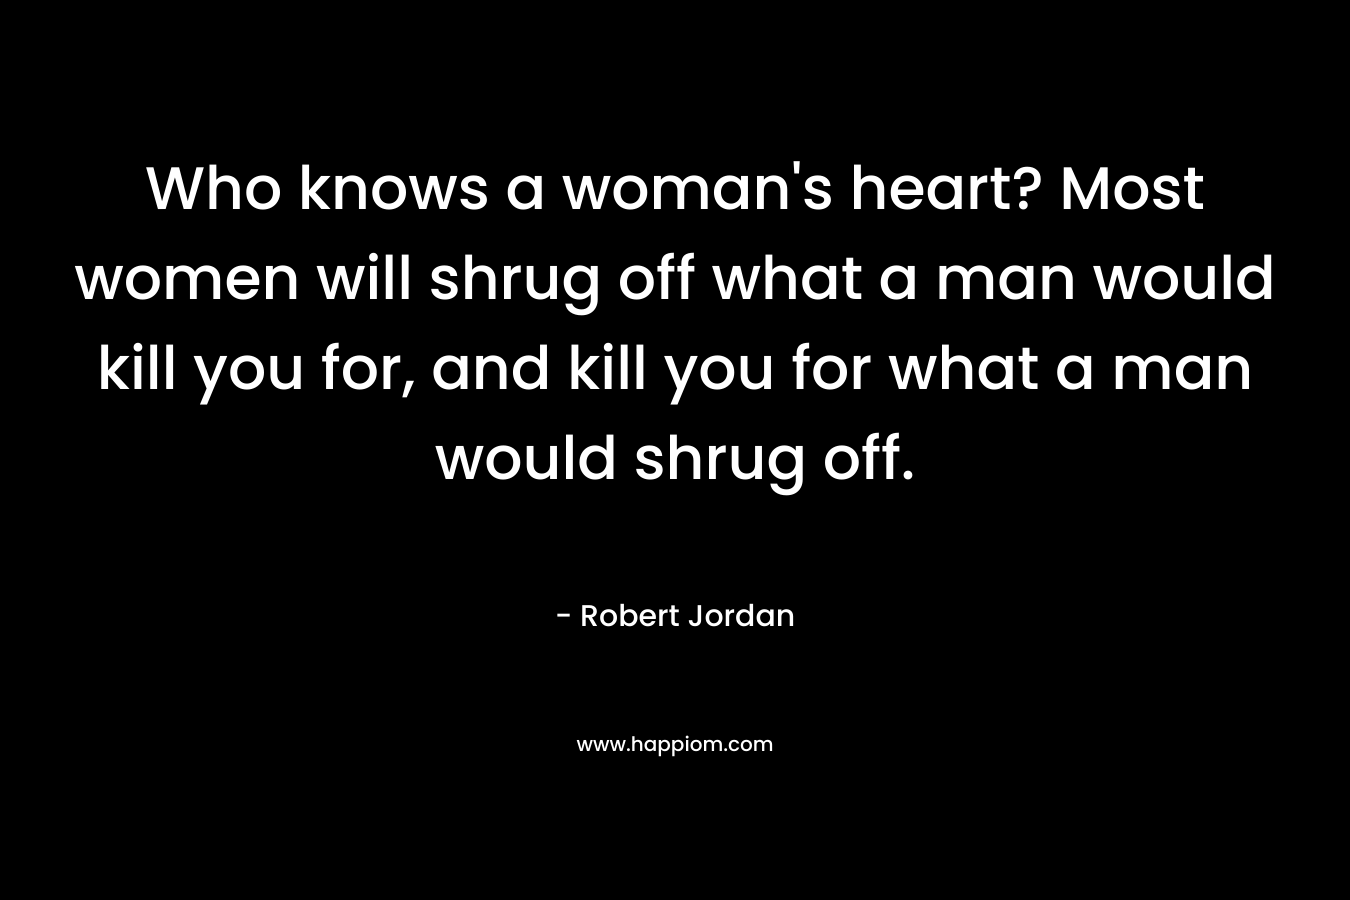 Who knows a woman's heart? Most women will shrug off what a man would kill you for, and kill you for what a man would shrug off.